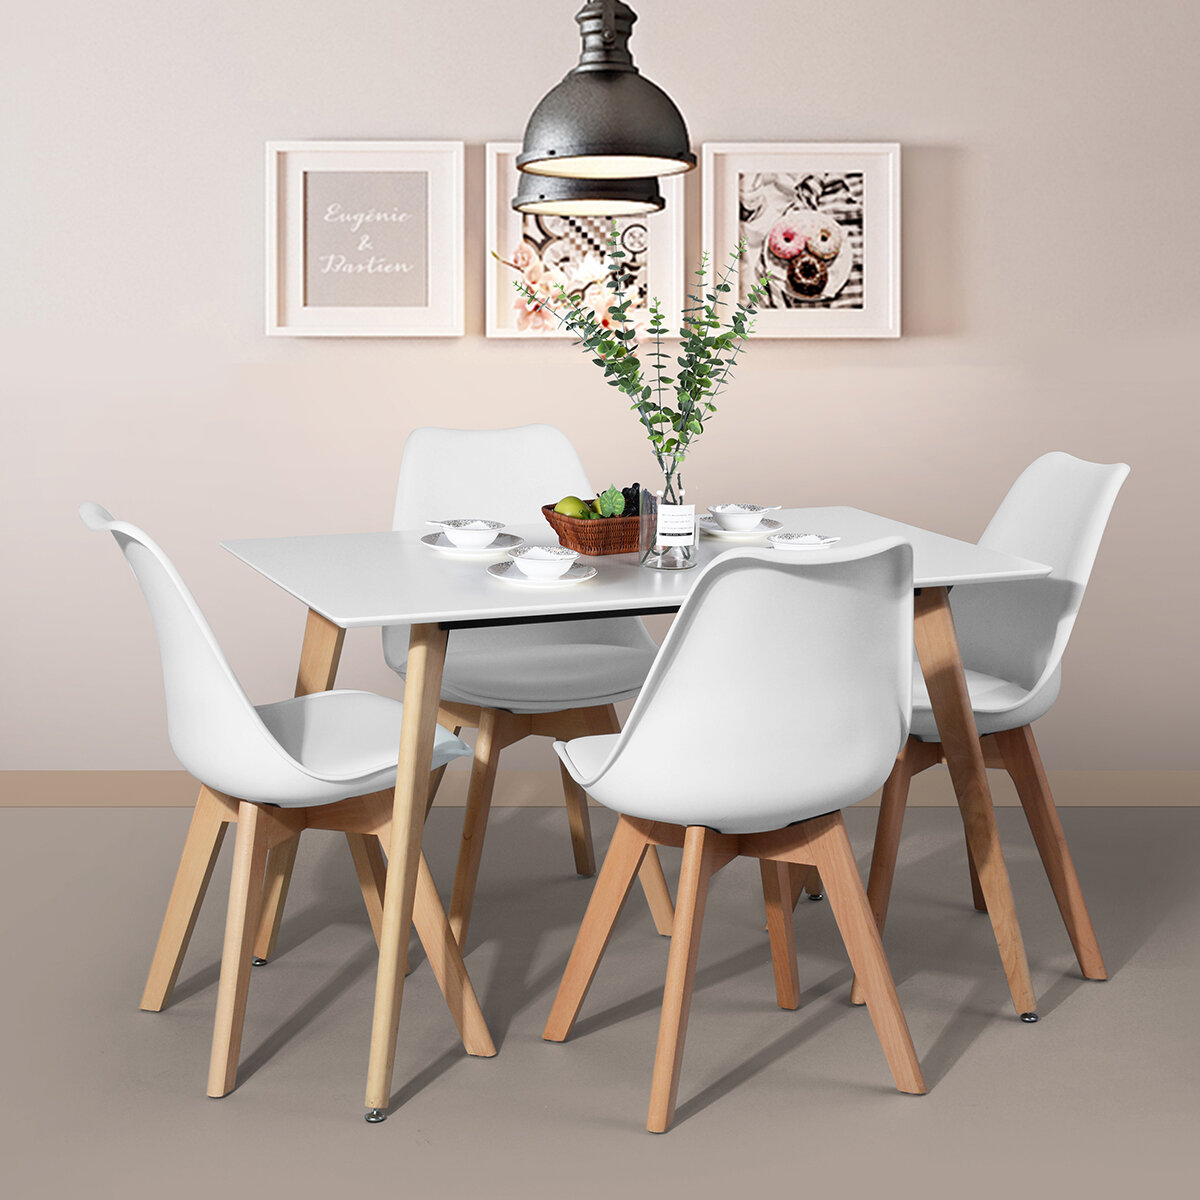 Small Kitchen Dining Room Sets On Sale Free Shipping Over 35 Wayfair